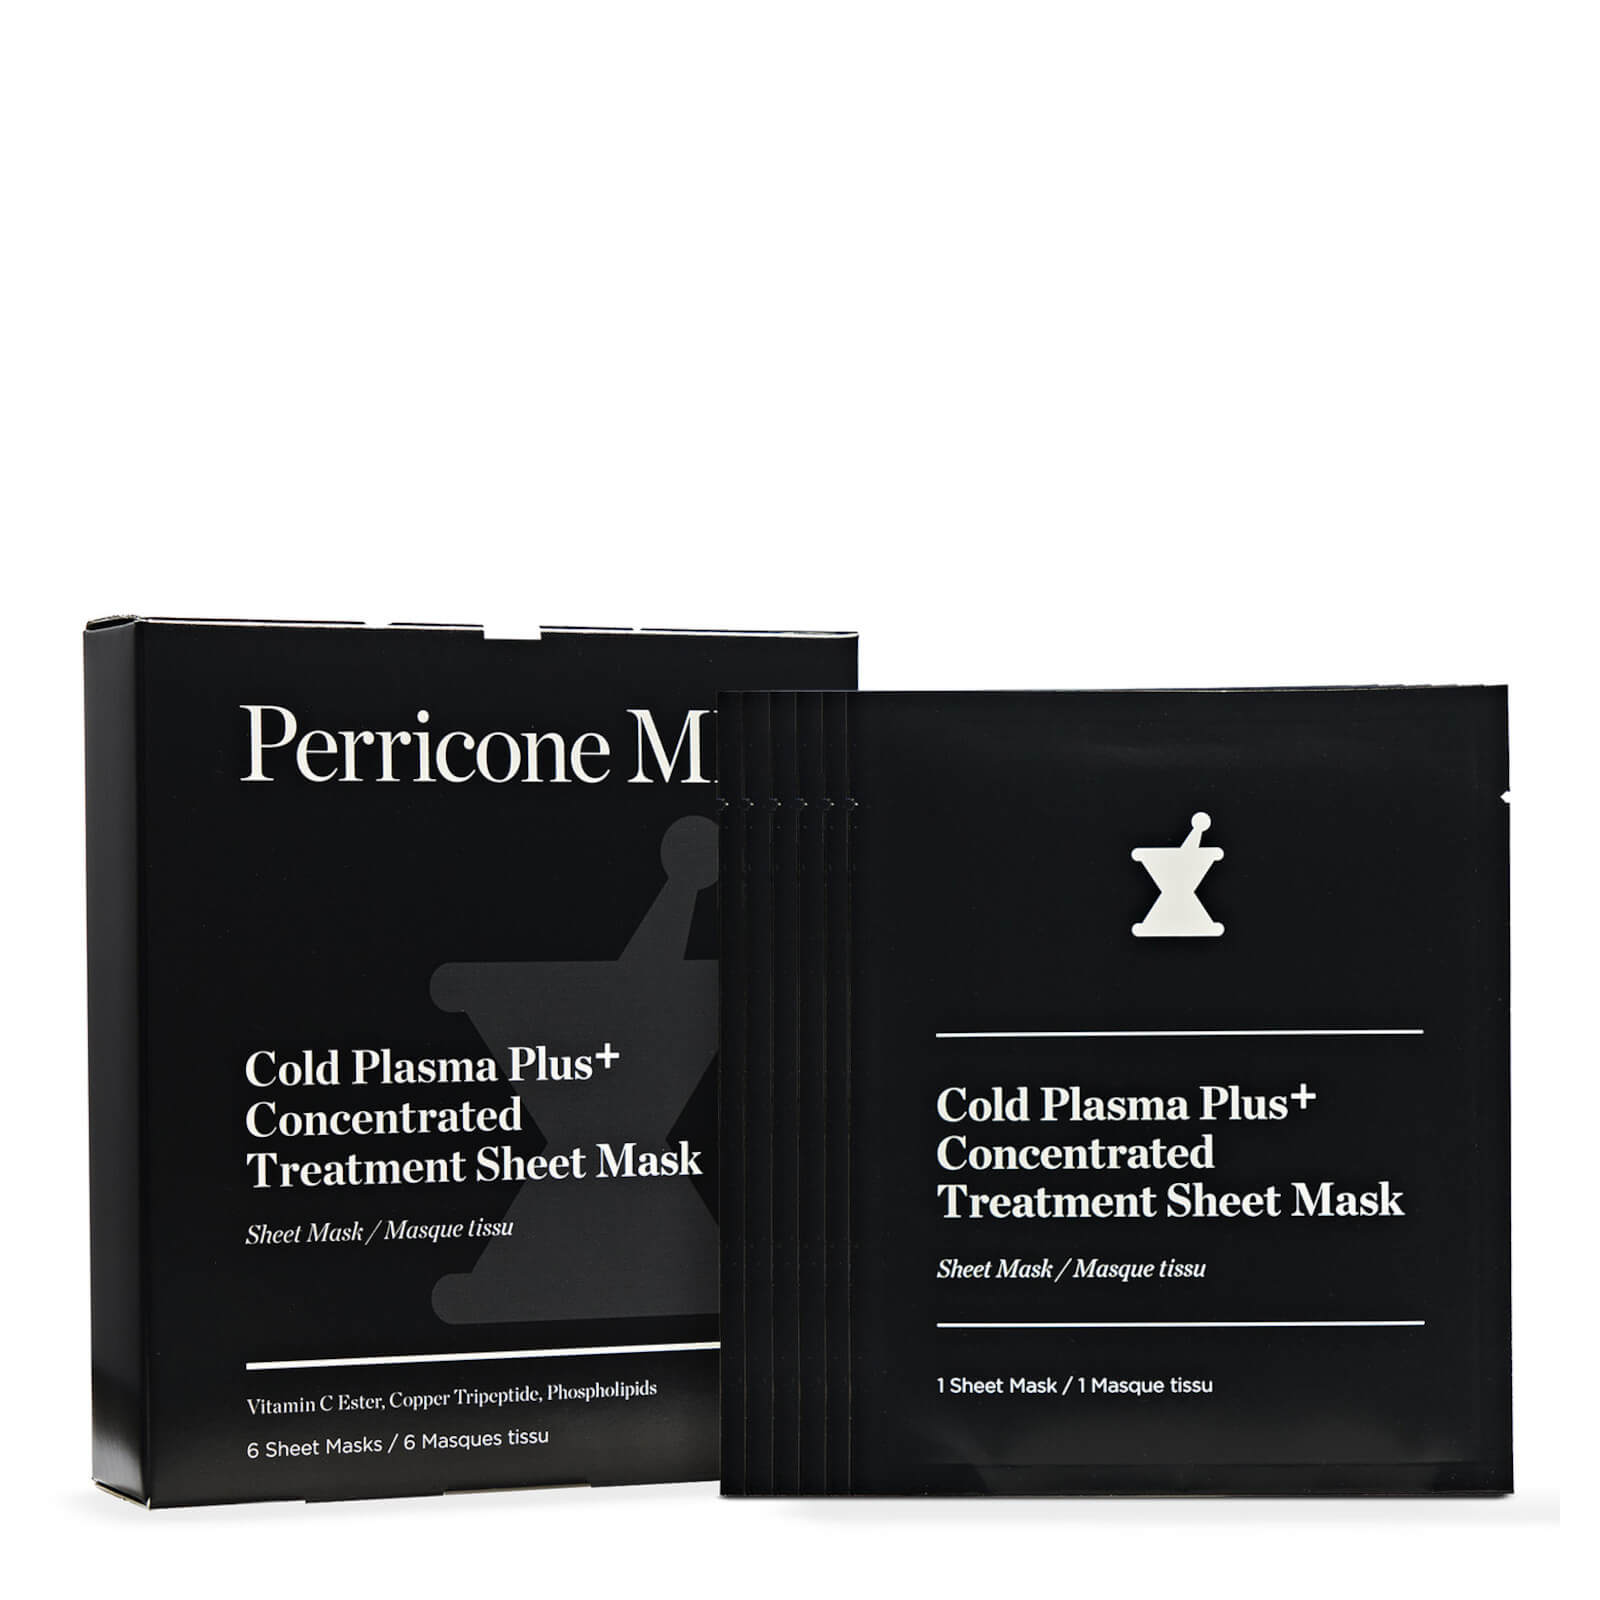 Perricone MD Cold Plasma Plus+ Concentrated Treatment Sheet Mask - Set of 6